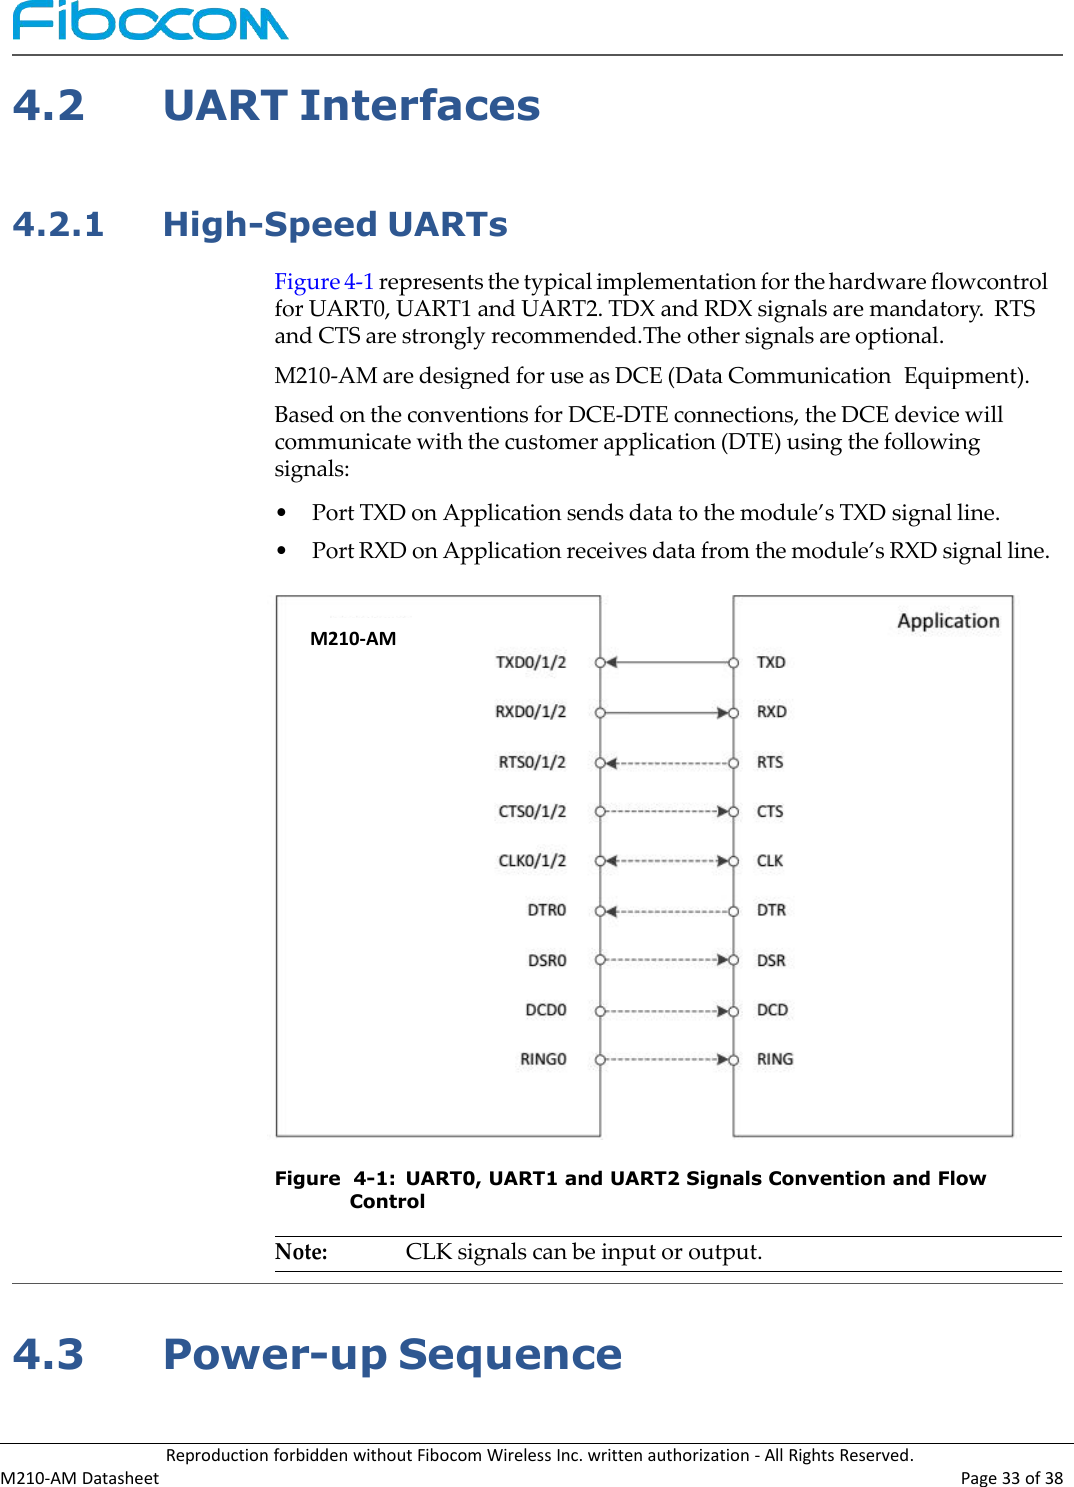 Reproduction forbidden without Fibocom Wireless Inc. written authorization - All Rights Reserved.M210-AM Datasheet Page 33 of 384.2UART Interfaces4.2.1High-Speed UARTsFigure 4-1 represents the typical implementation for the hardware flowcontrolfor UART0, UART1 and UART2. TDX and RDX signals are mandatory. RTSand CTS are strongly recommended.The other signals are optional.M210-AM are designed for use as DCE (Data Communication Equipment).Based on the conventions for DCE-DTE connections, the DCE device willcommunicate with the customer application (DTE) using the followingsignals:•Port TXD on Application sends data to the module’s TXD signal line.•Port RXD on Application receives data from the module’s RXD signal line.Figure 4-1: UART0, UART1 and UART2 Signals Convention and FlowControlNote:CLK signals can be input or output.4.3Power-up SequenceM210-AM